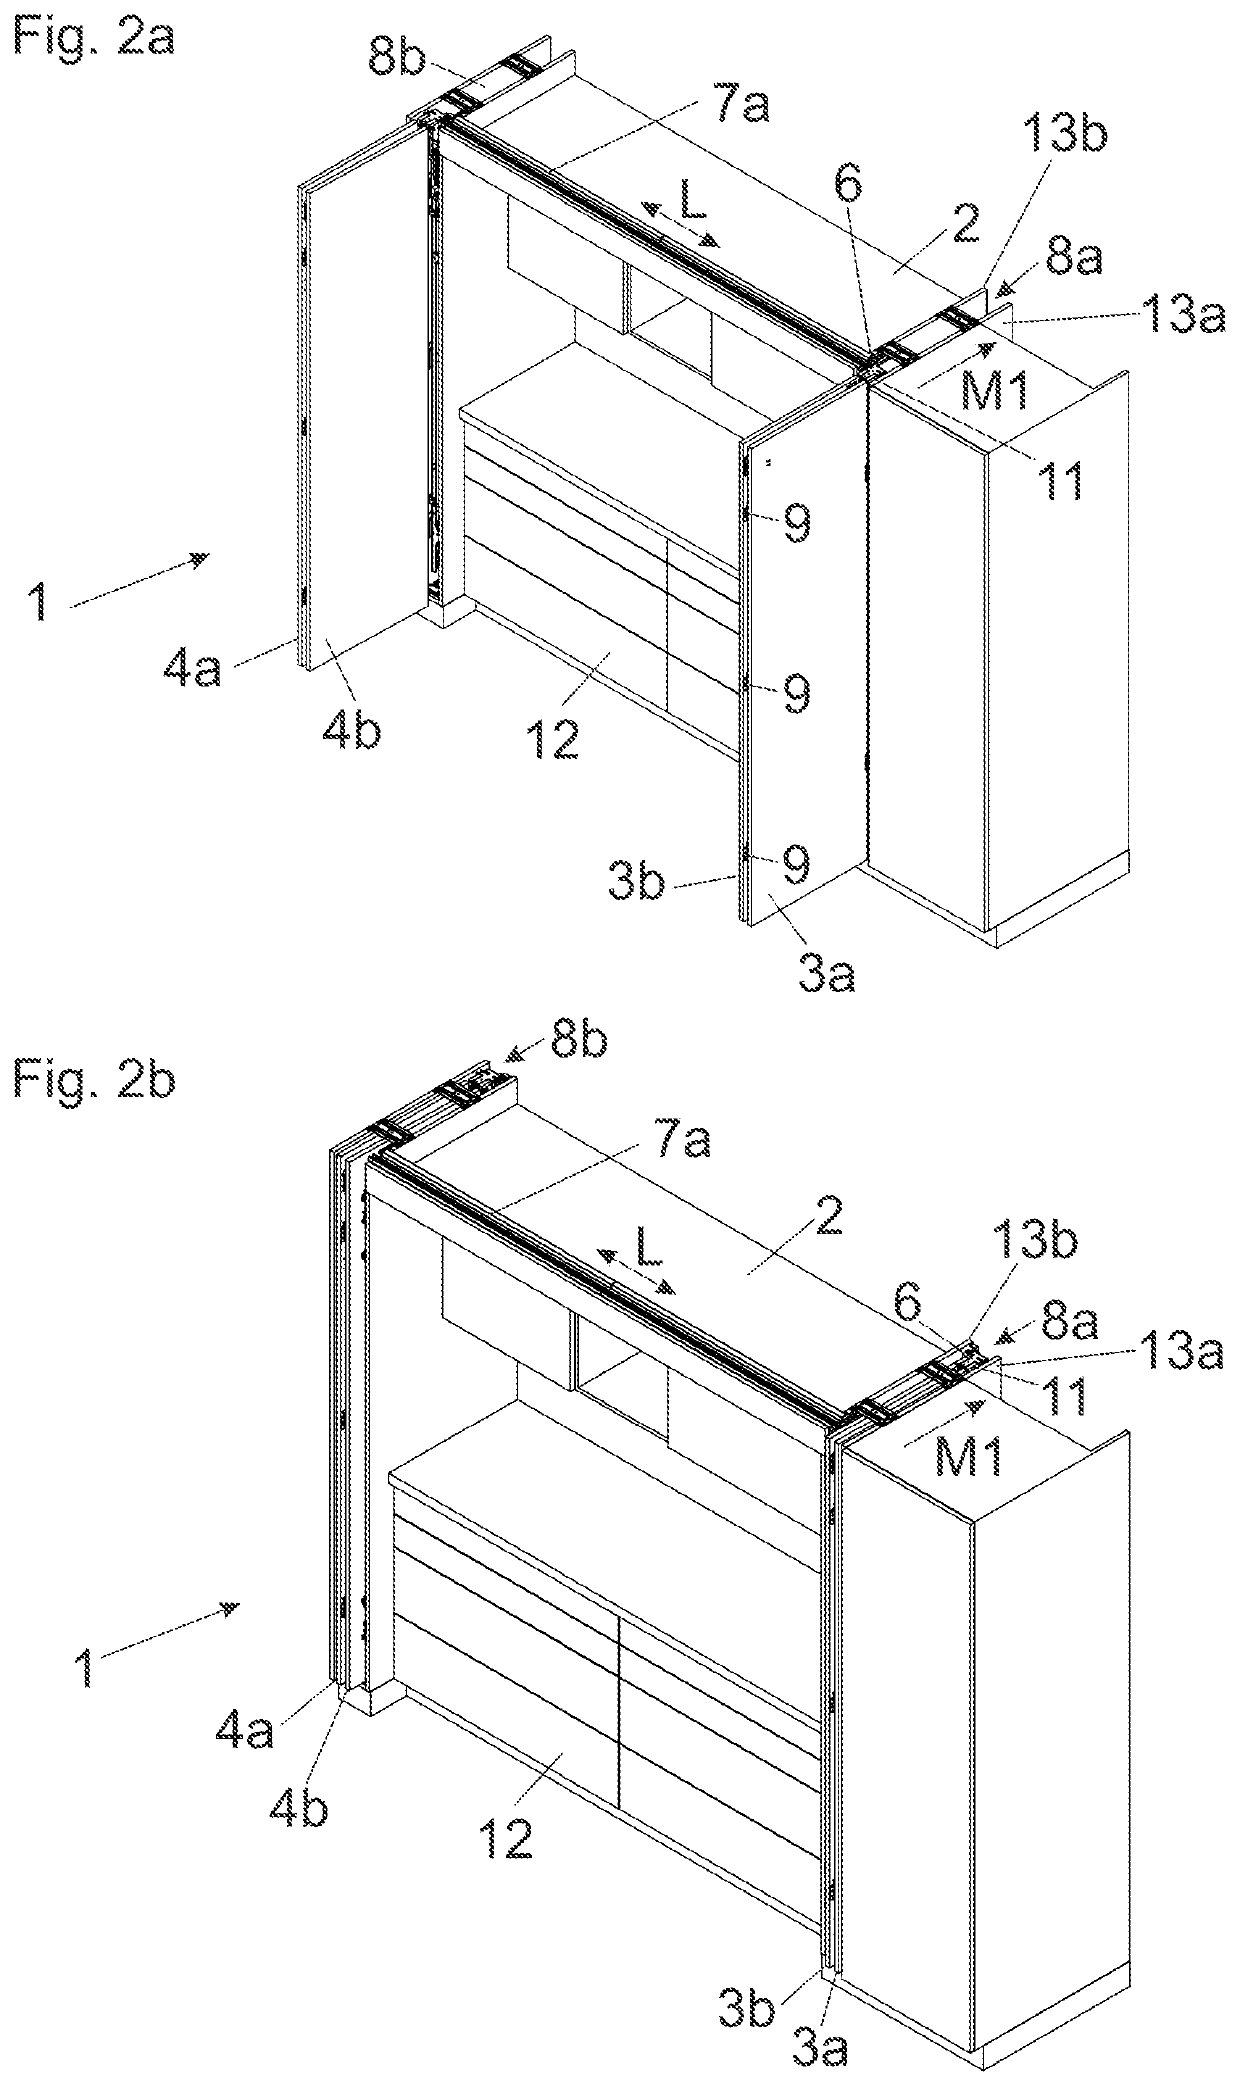 Control cam assembly for controlling a movement of a furniture part